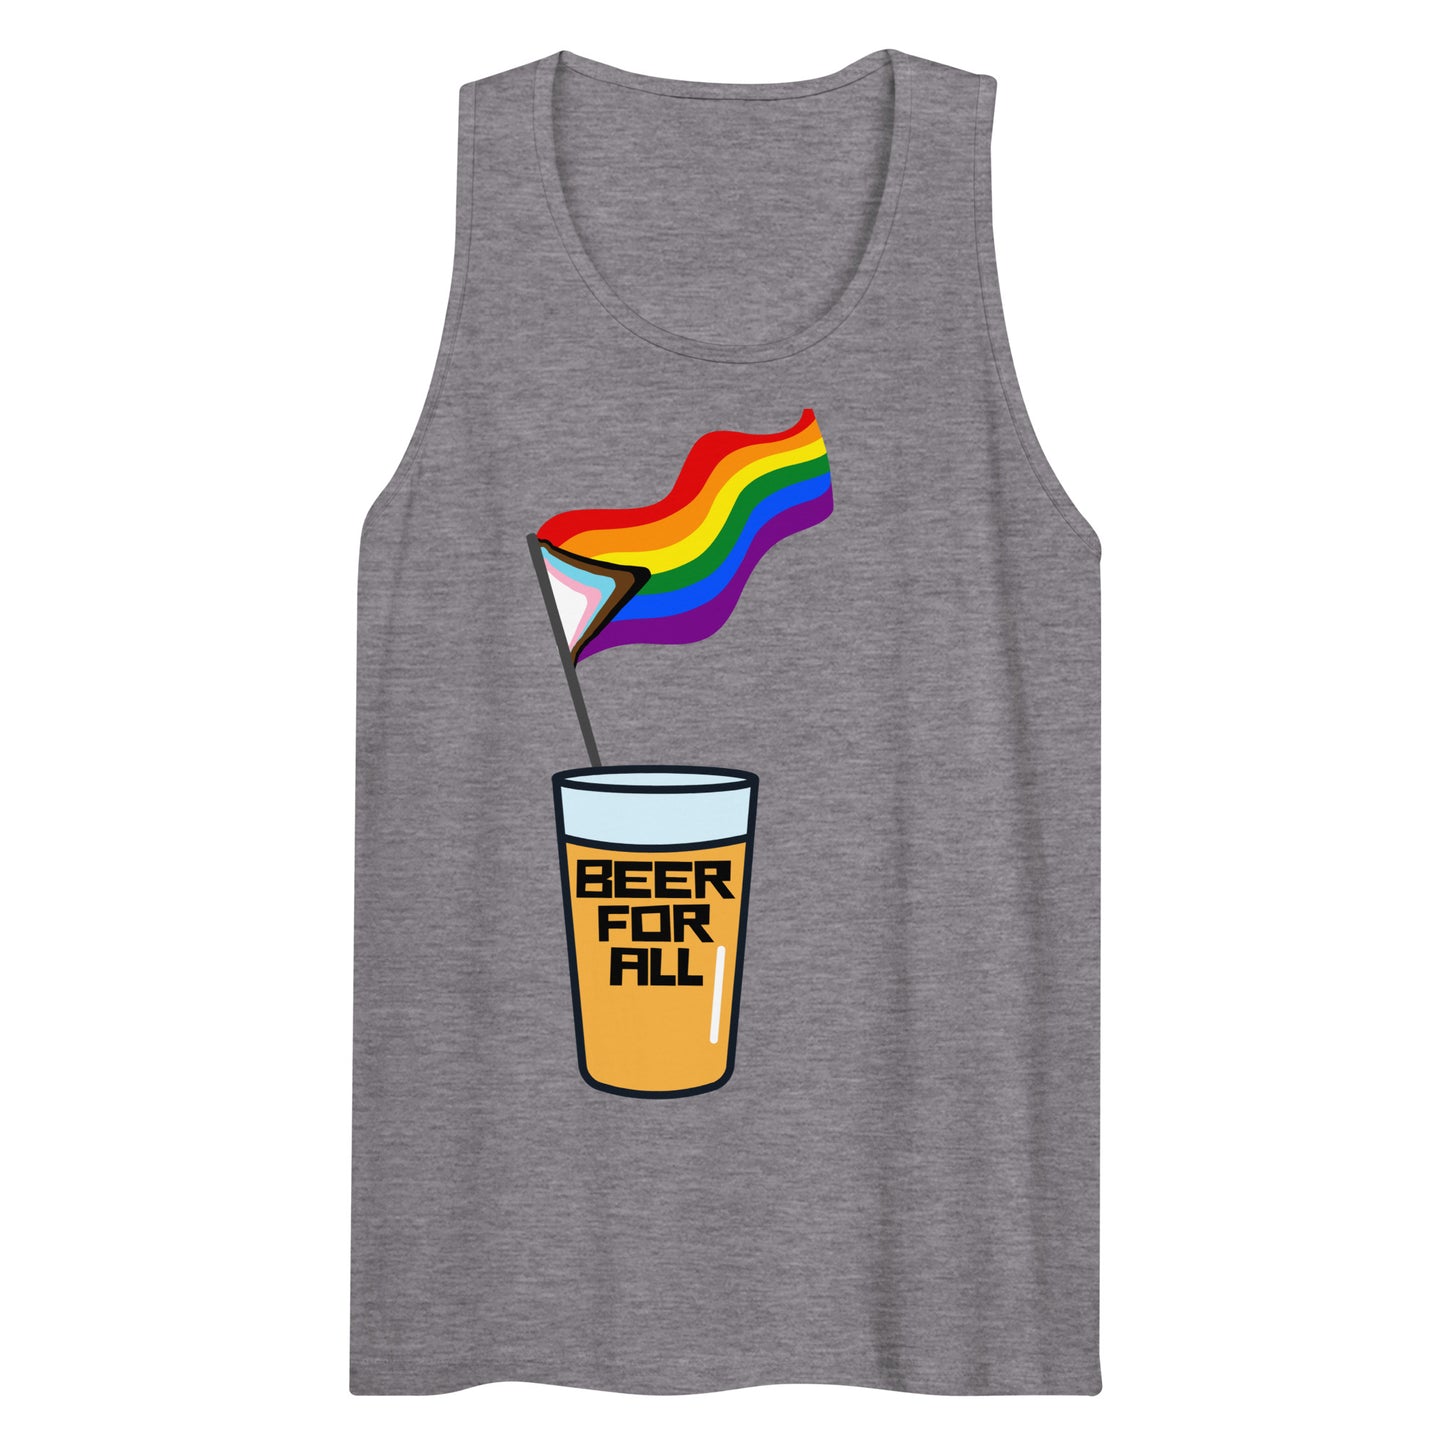 Beer For All Uni-sexy Muscle shirt